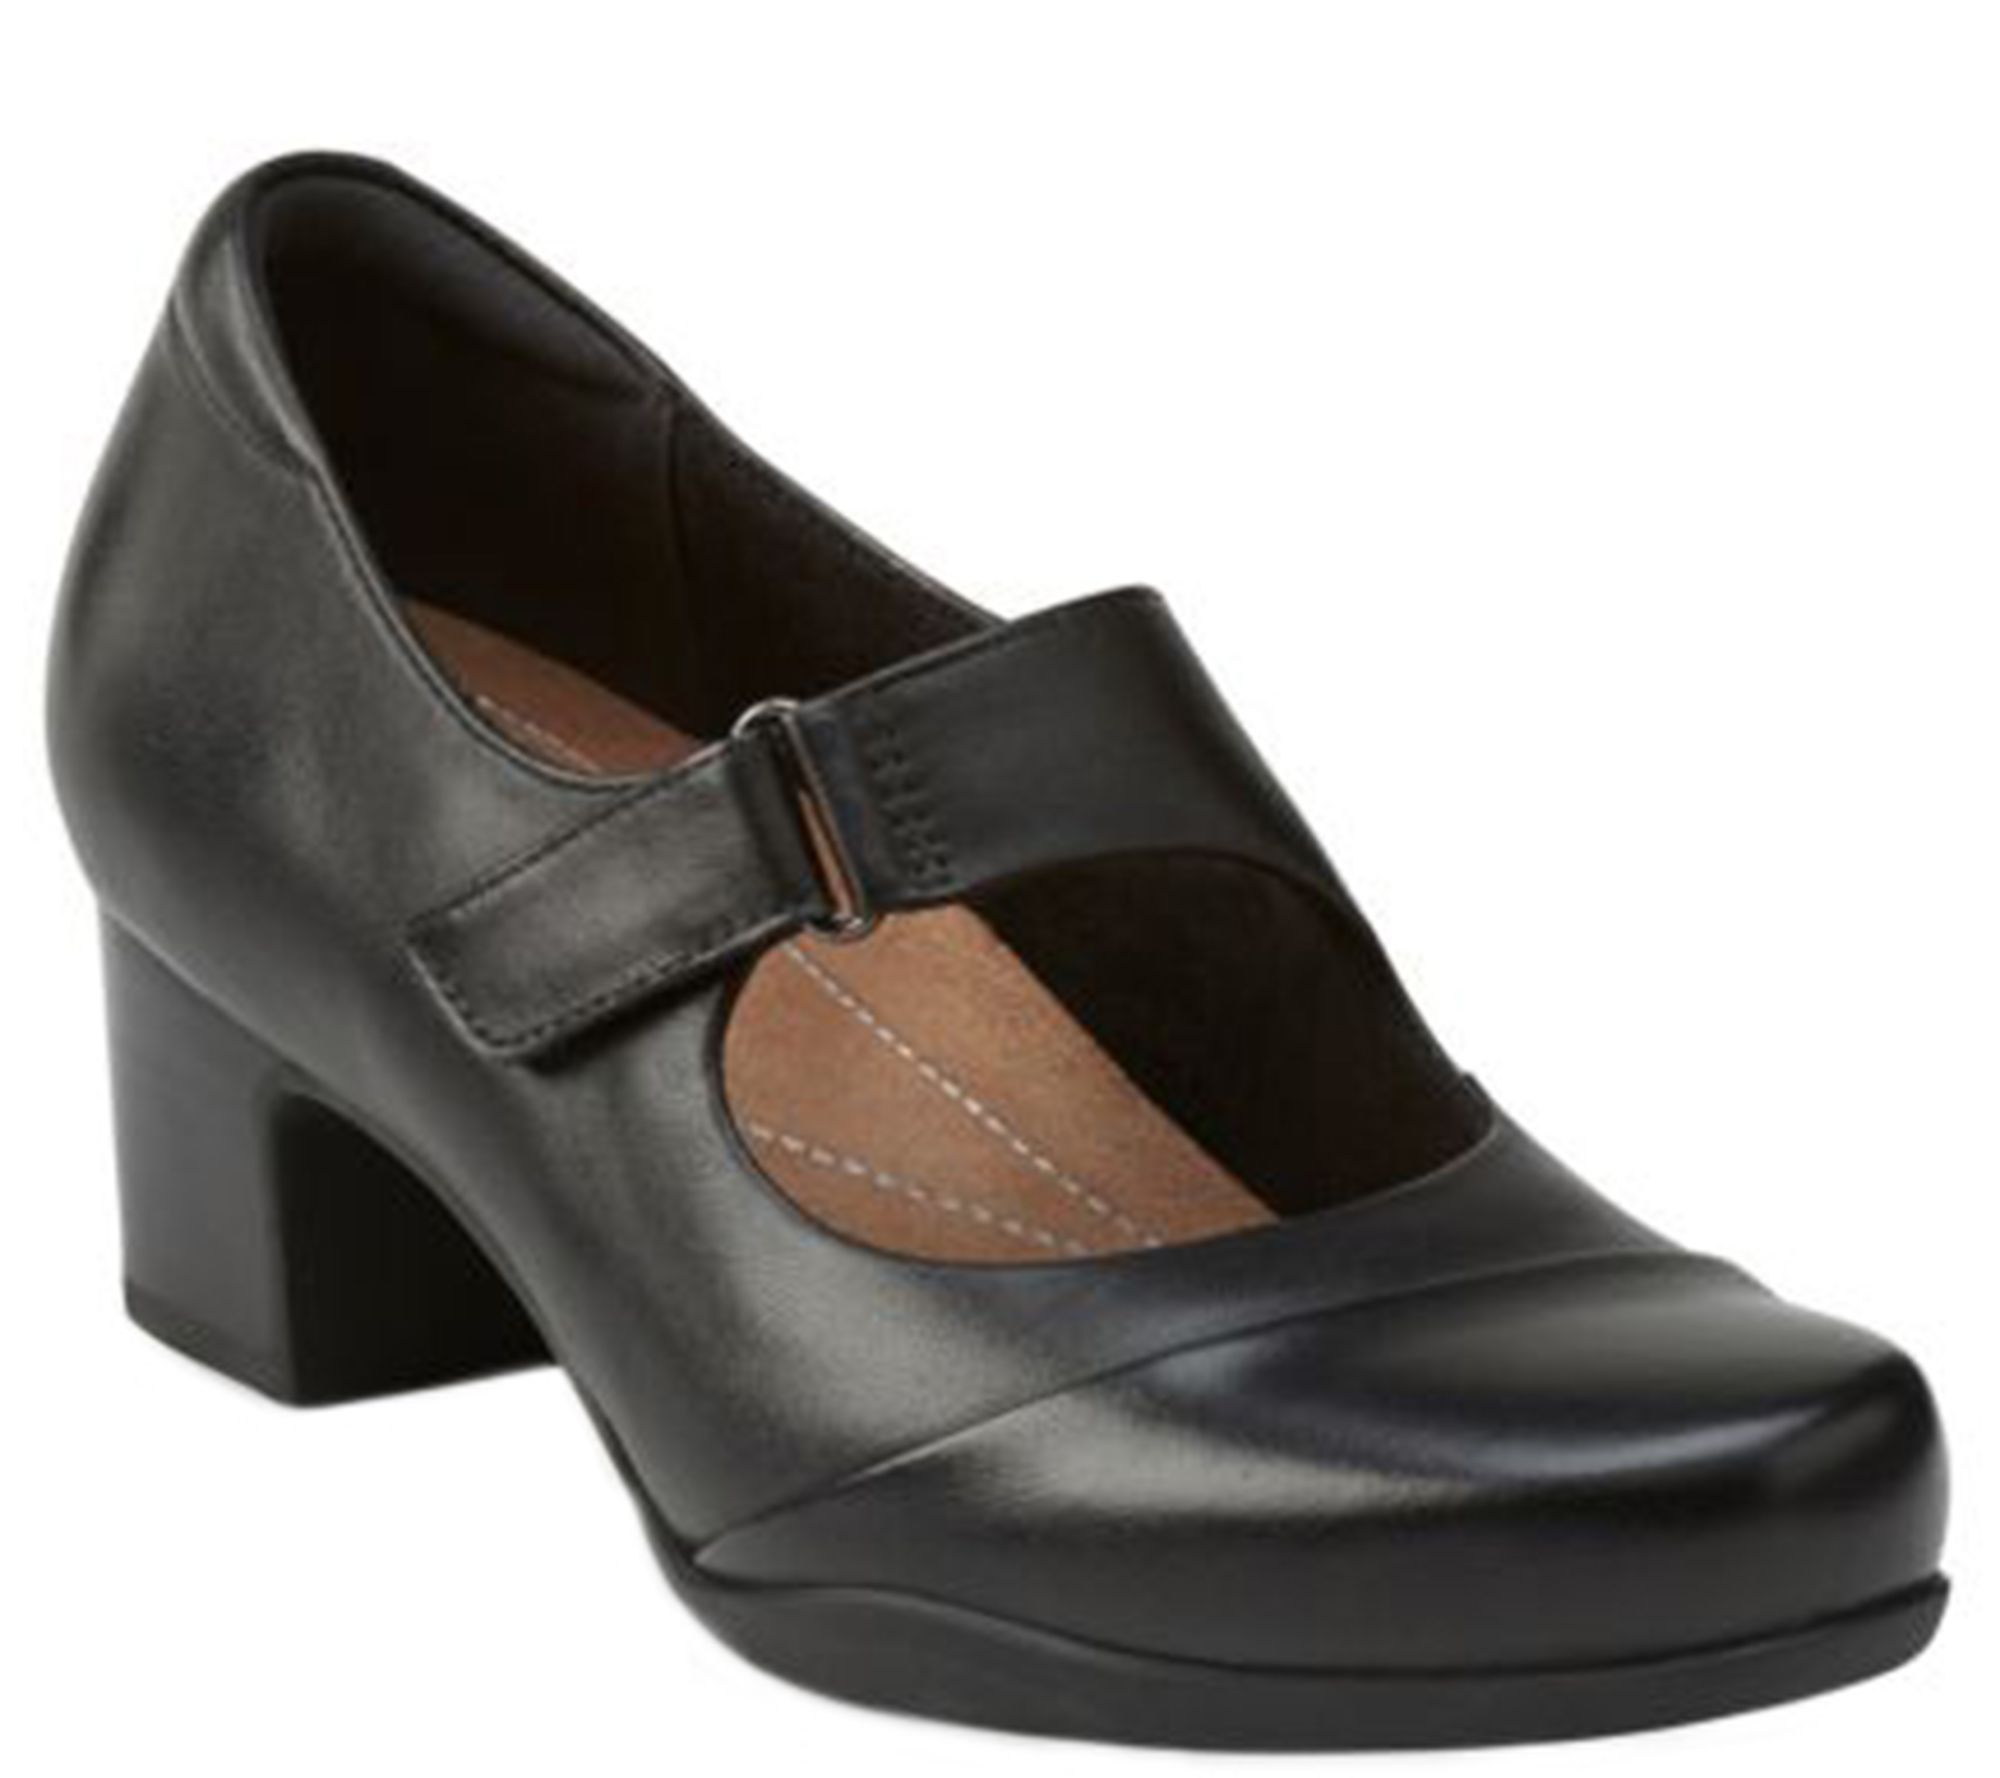 Clarks Artisan Leather Mary Jane Pumps 